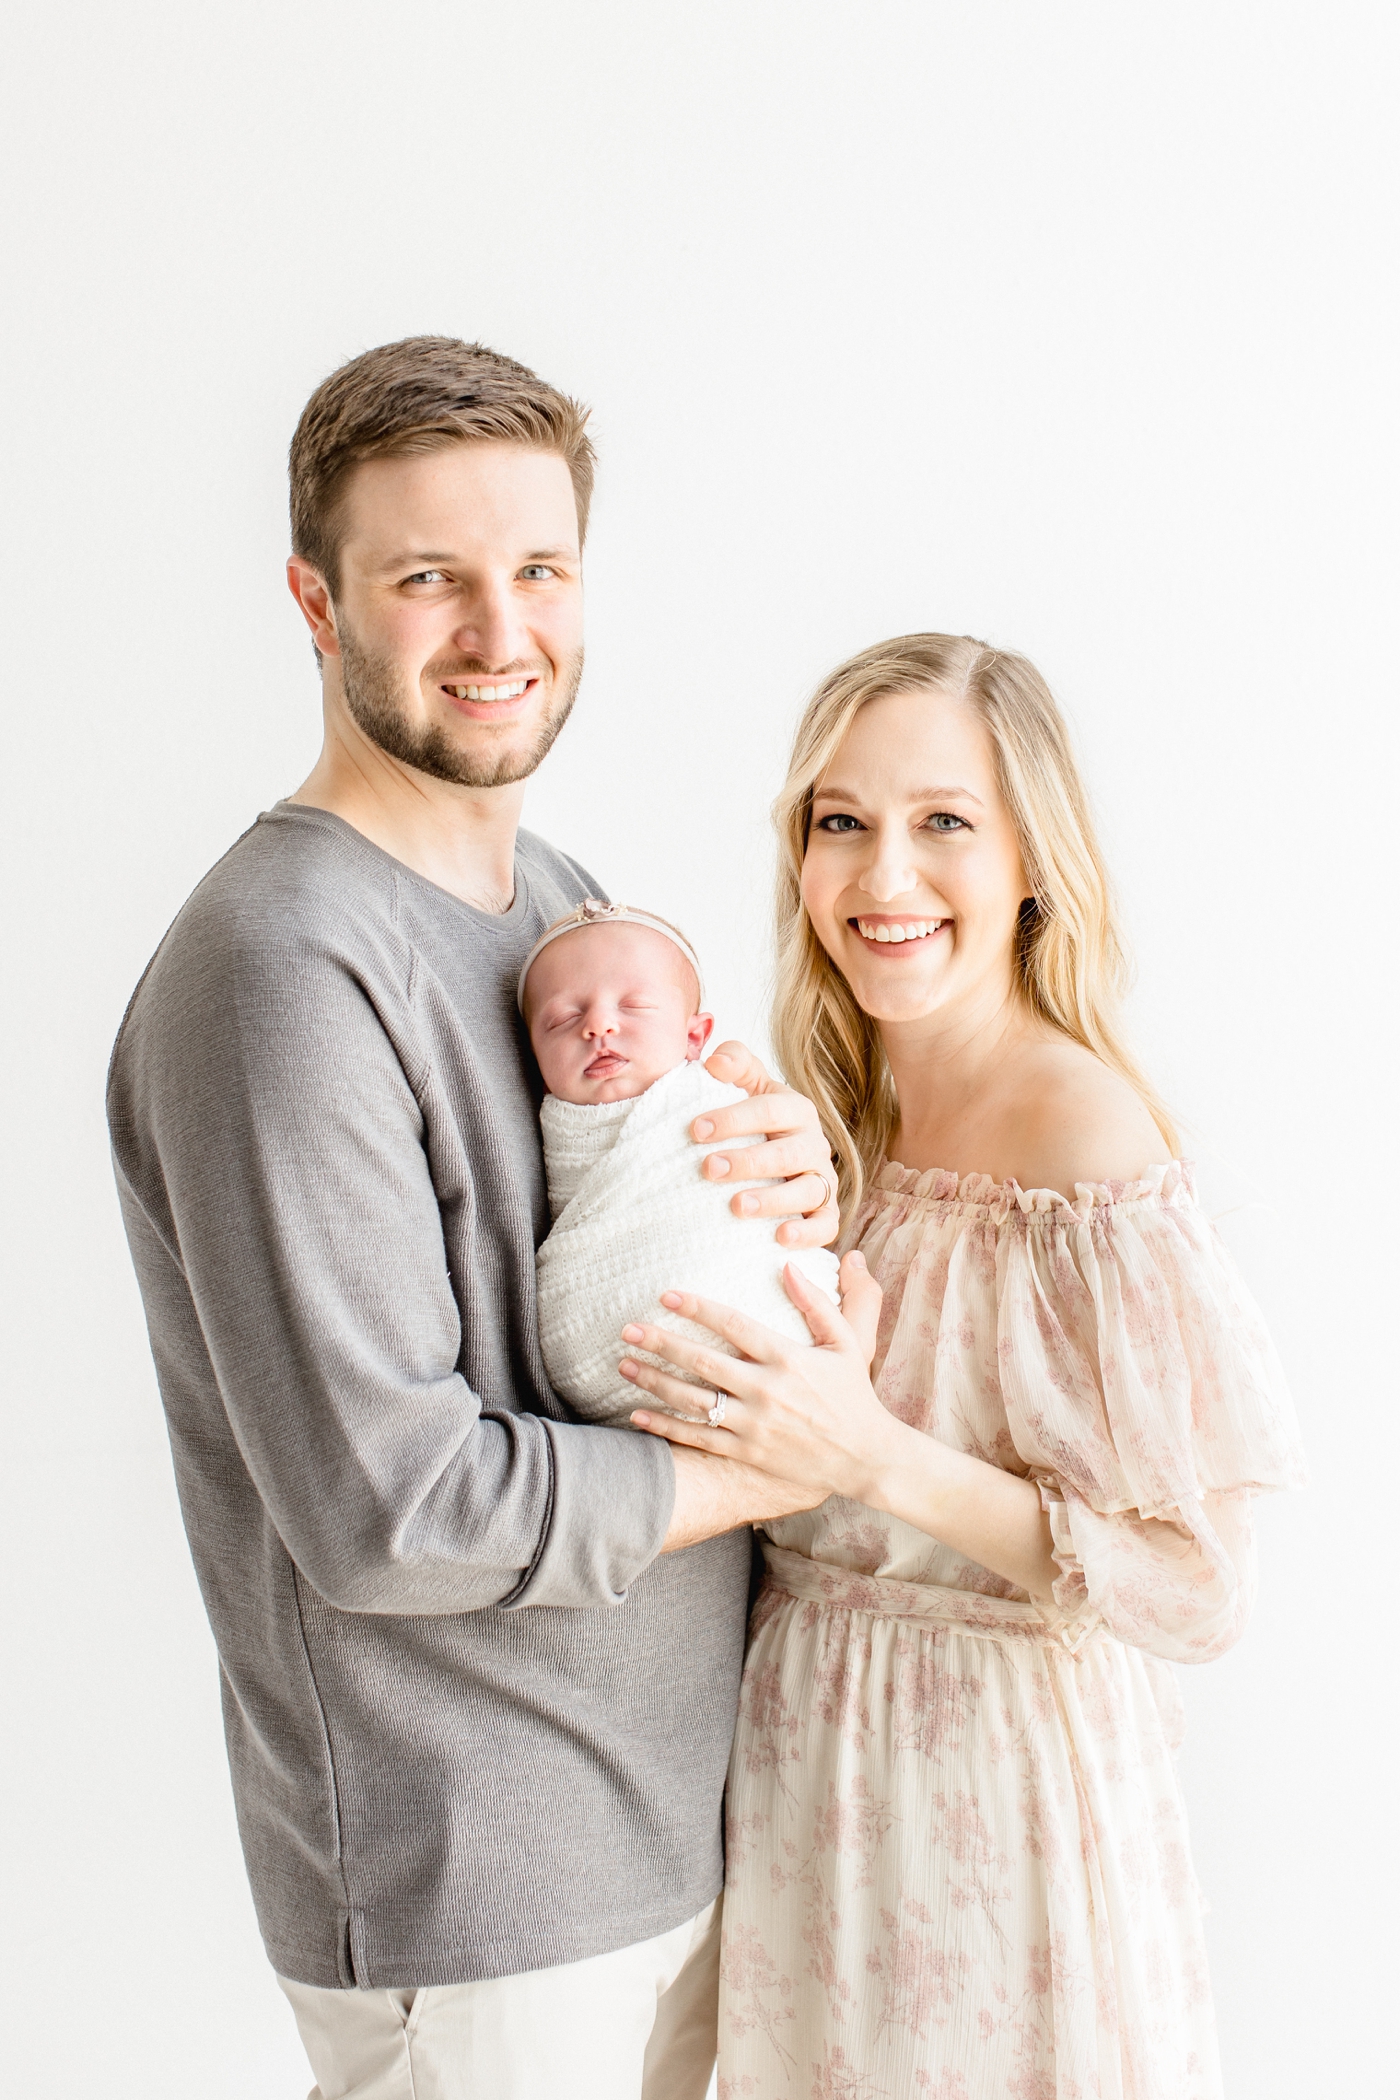 Traditional portrait of family smiling at camera during studio newborn session. Photo by Sana Ahmed Photography.